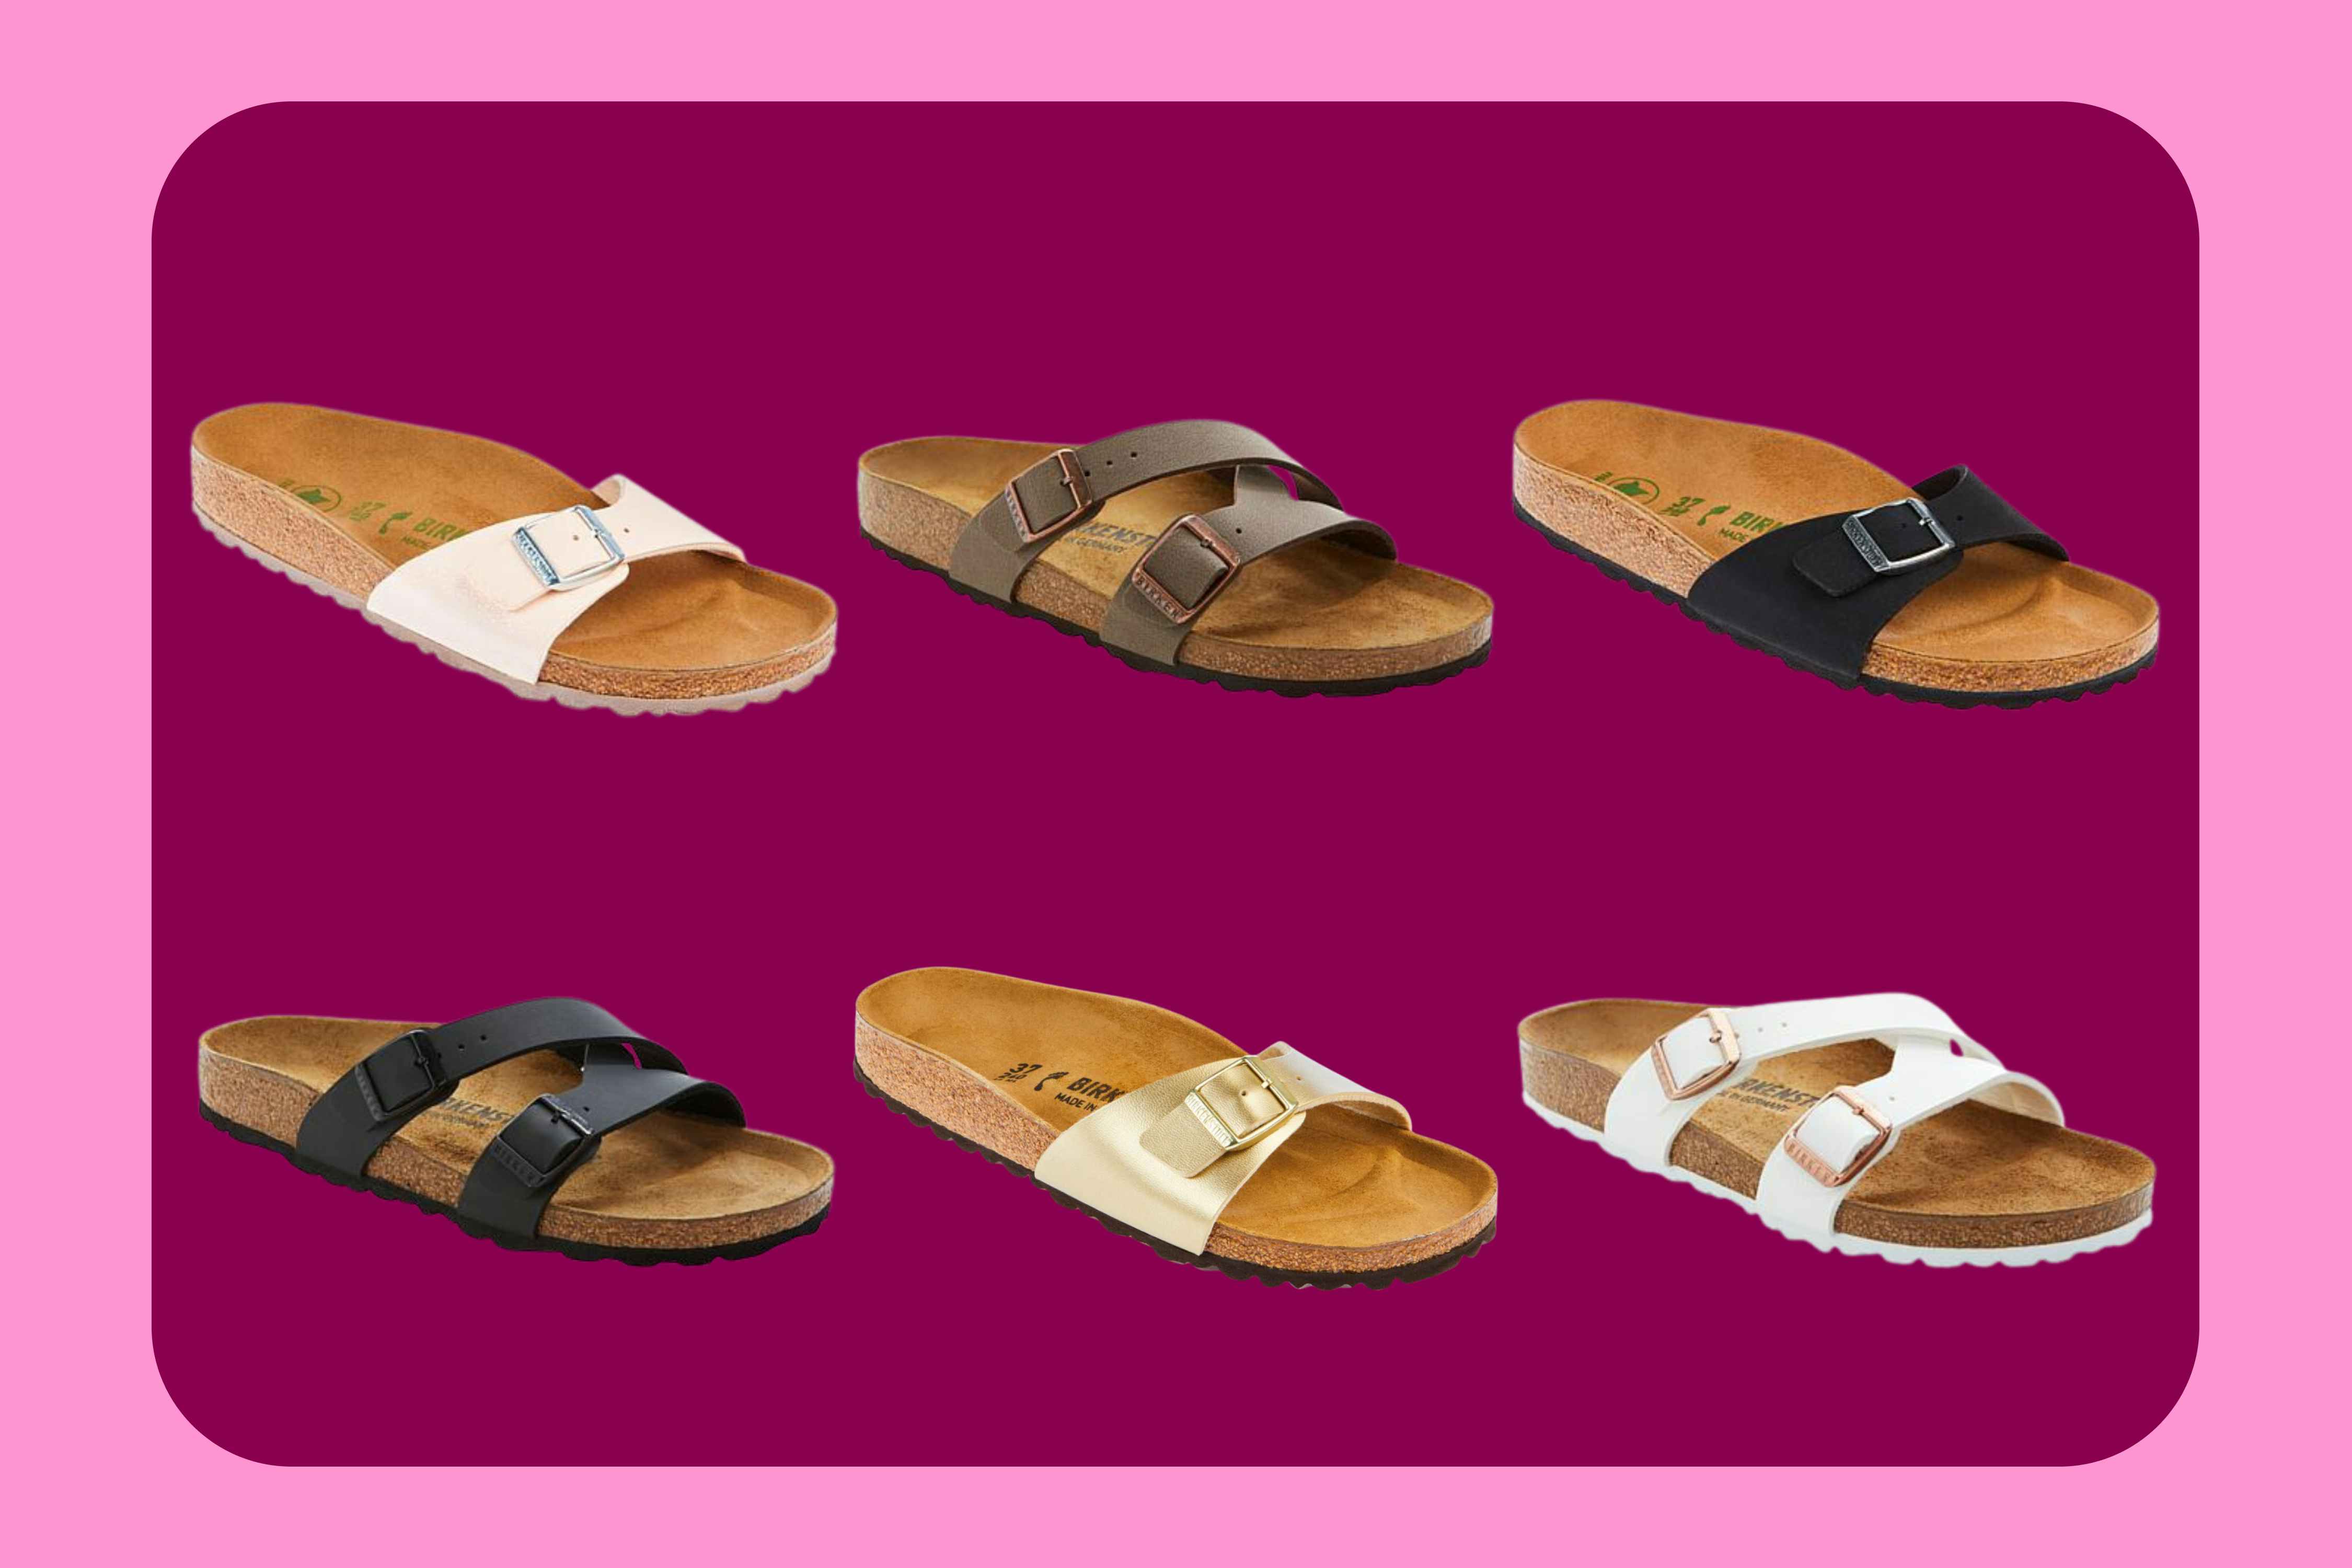 Get a Pair of Birkenstock Sandals for as Little as $60 at HSN (Reg. $90+)